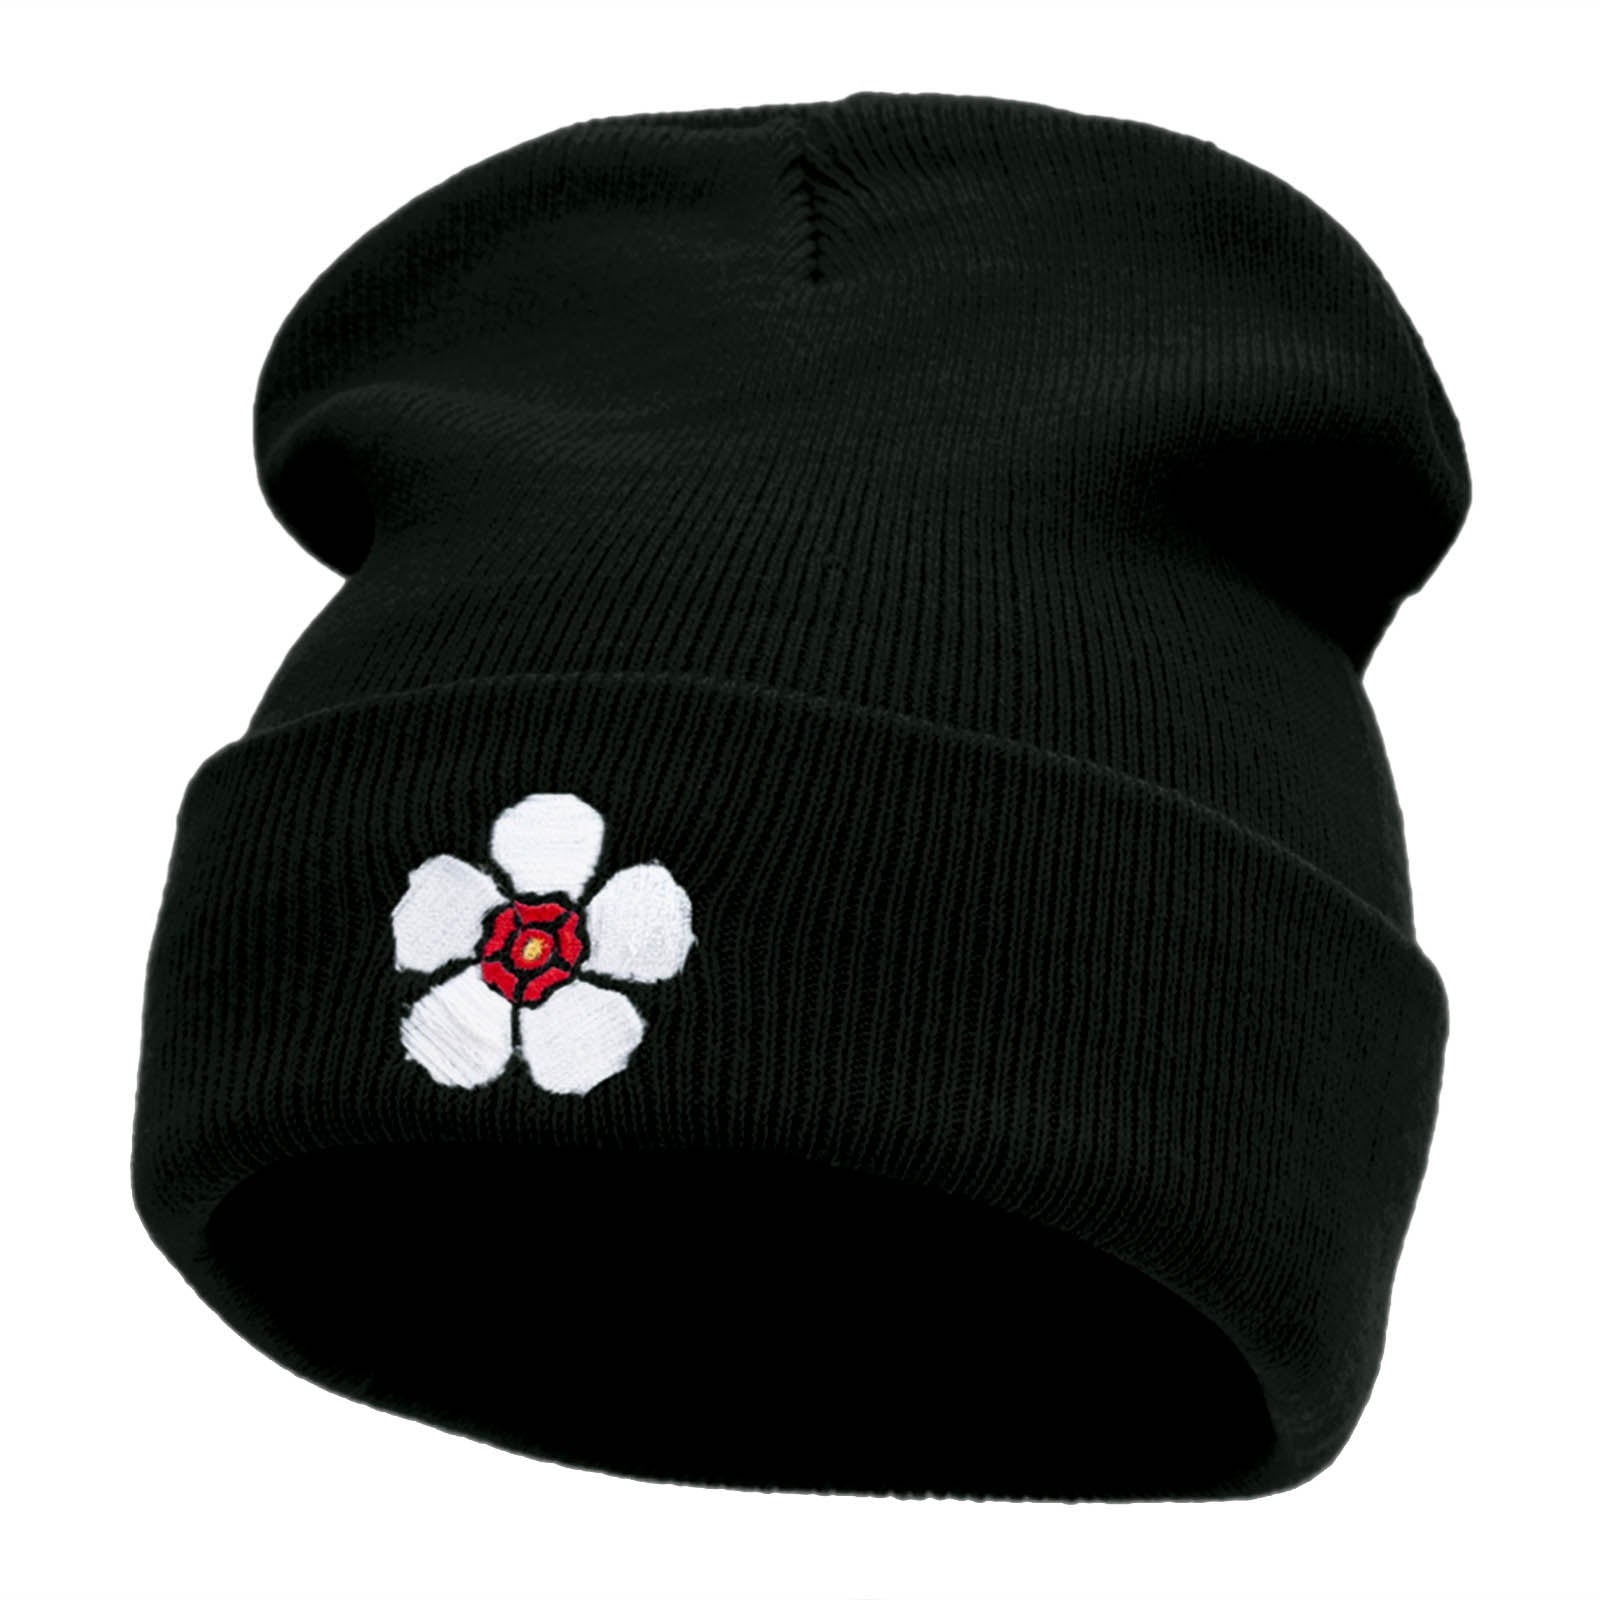 Korean Hibiscus Embroidered 12 Inch Long Knitted Beanie - Black OSFM